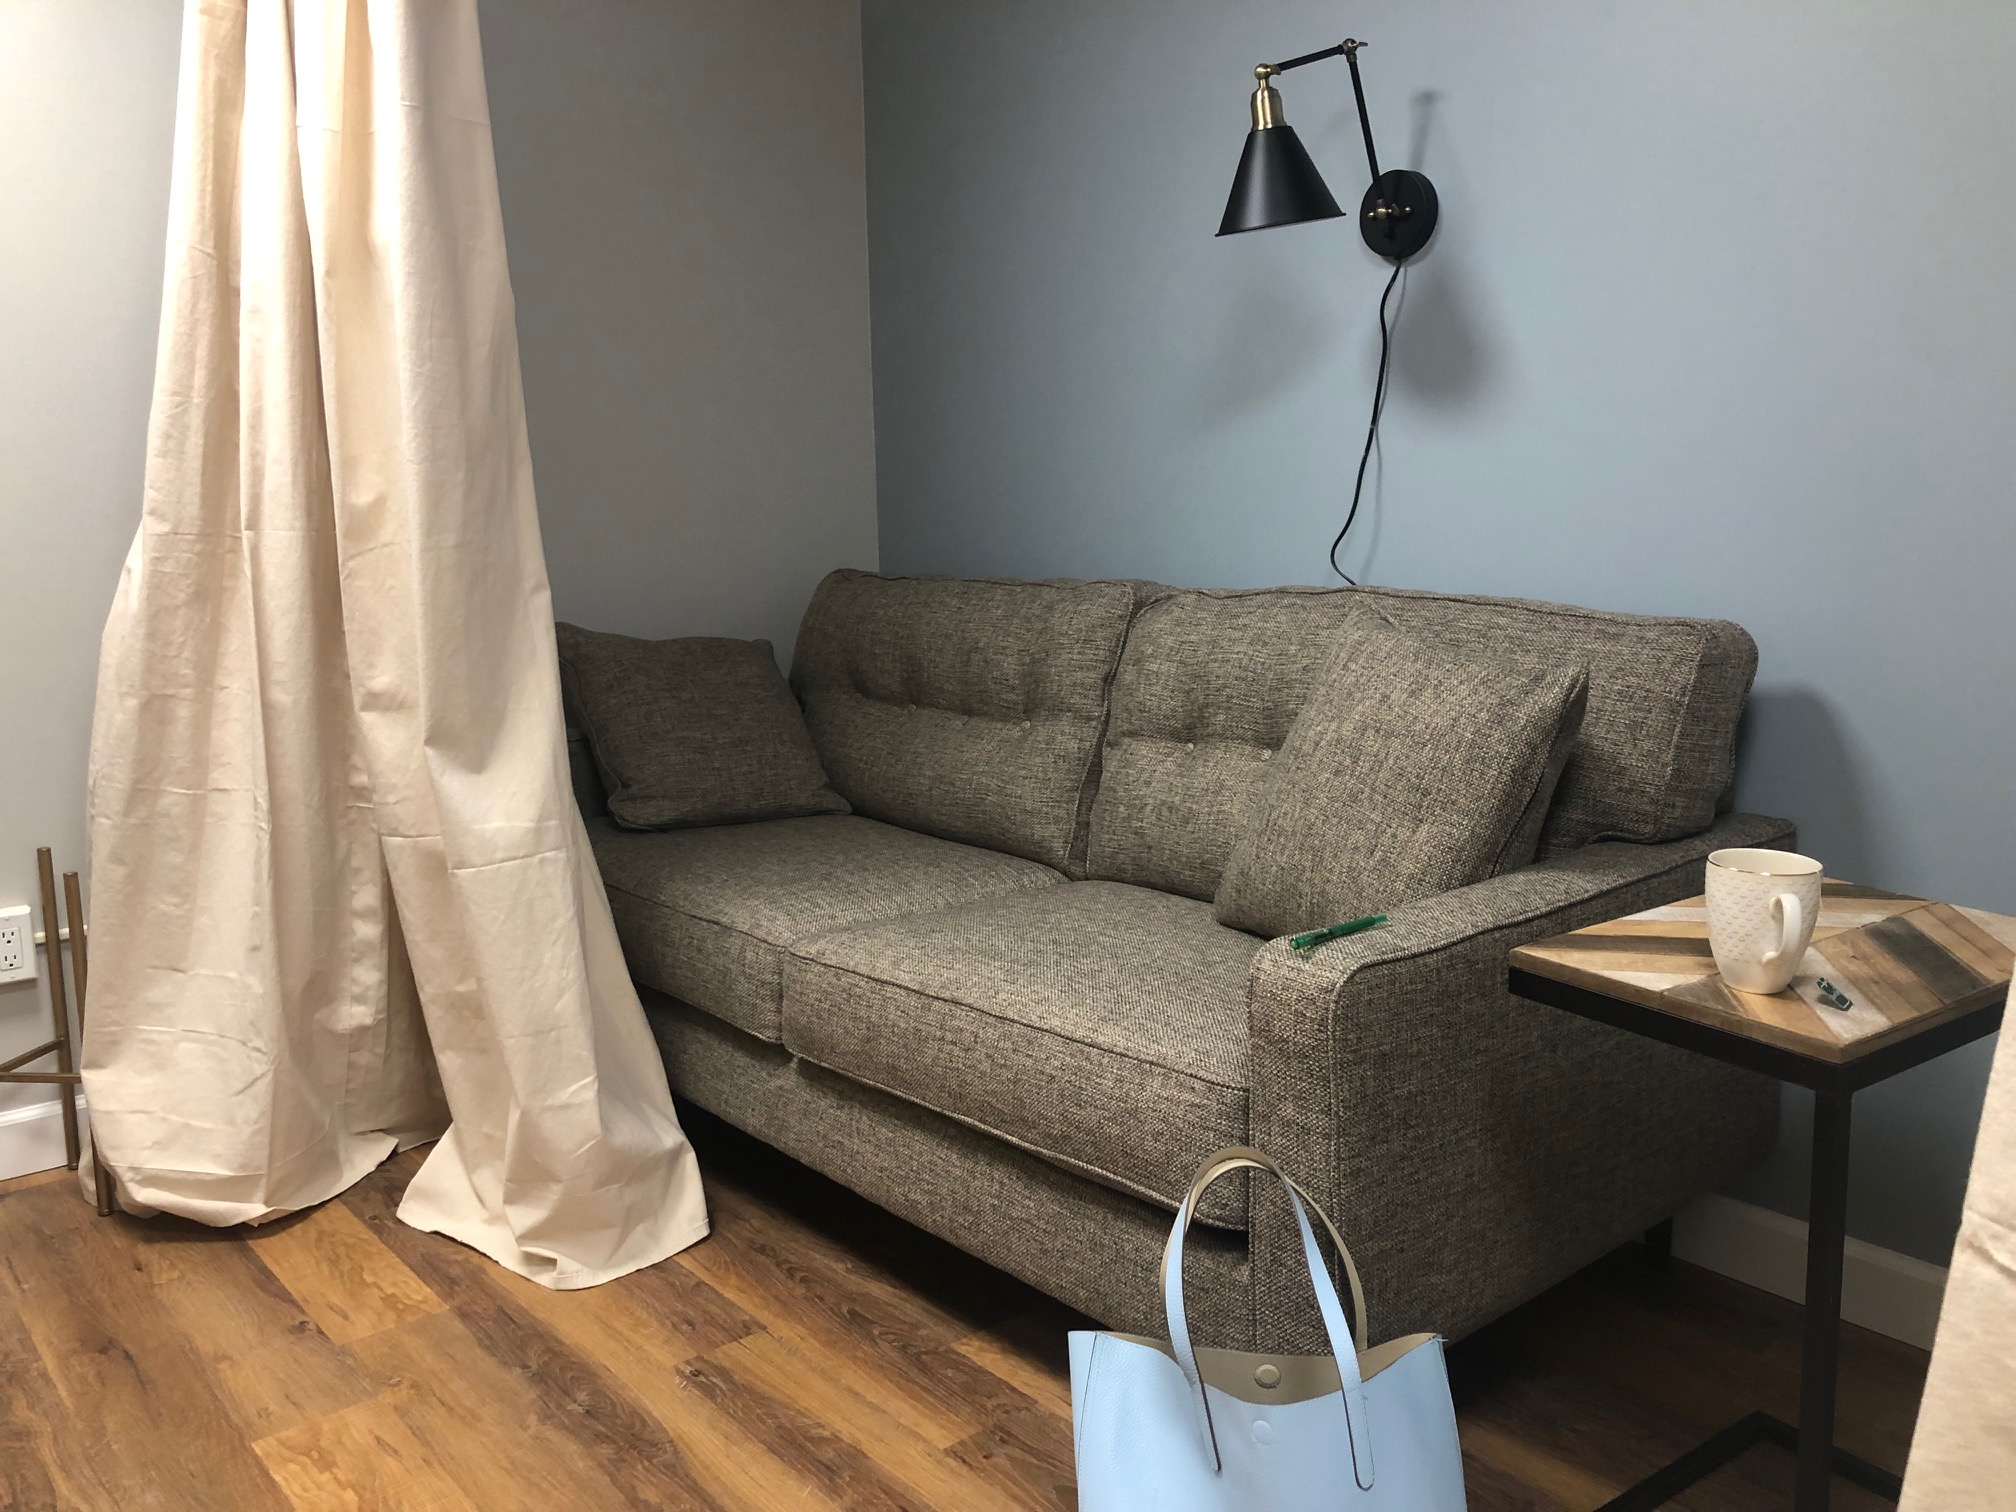 A large cushioned gray couch is in front of a gray wall with a curtain right in front of the couch. The wooden floor has a blue purse on it beside the couch, and there is an end table with notebooks and pens on it. Photo by Alyssa Buckley. 